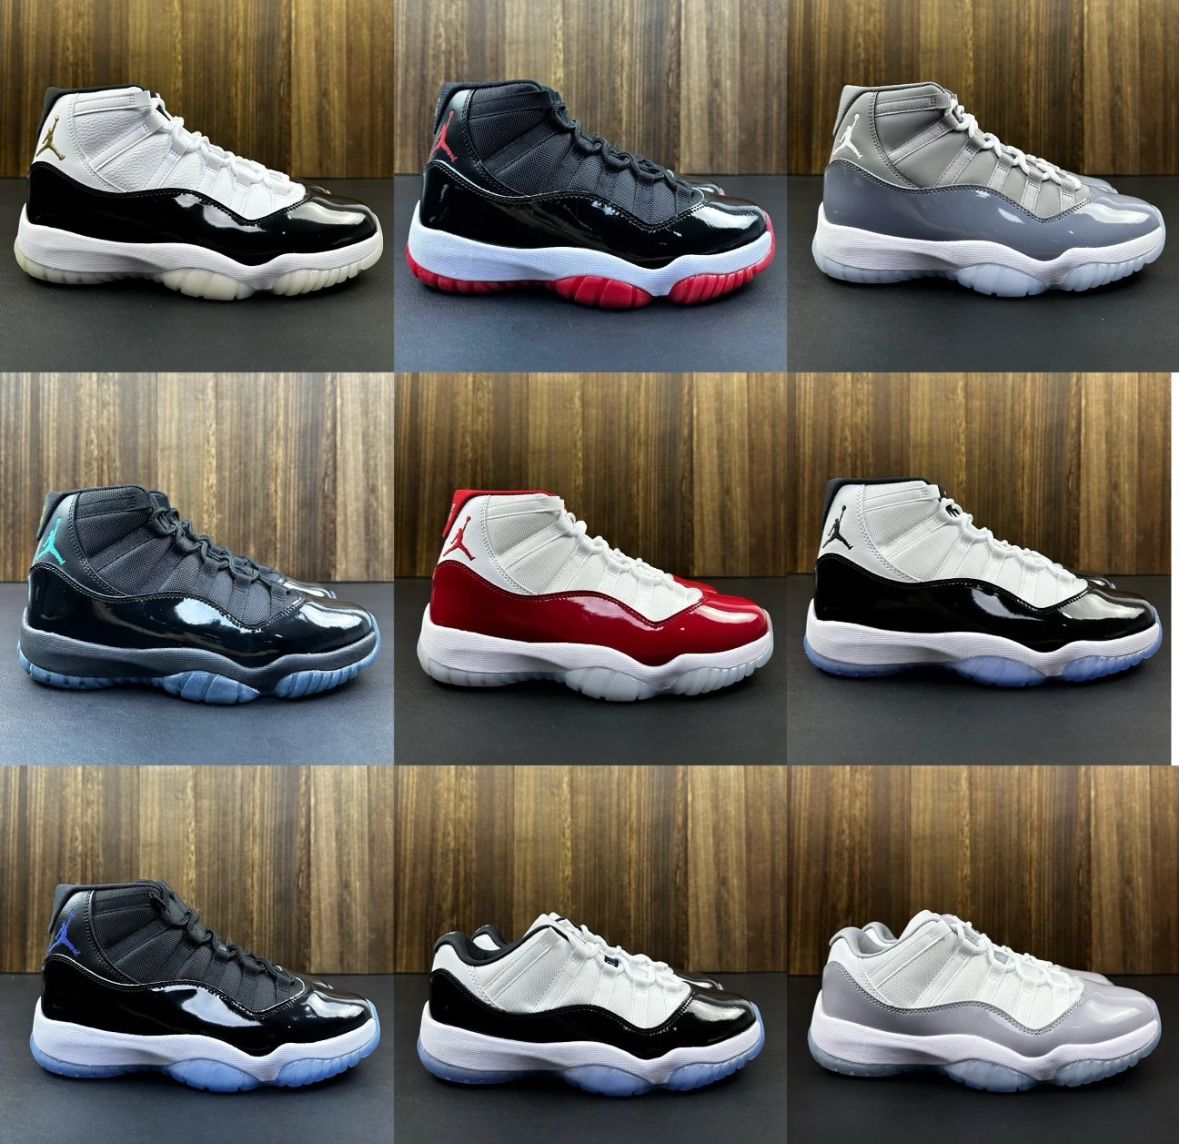 jordan 11 all sizes and colorways